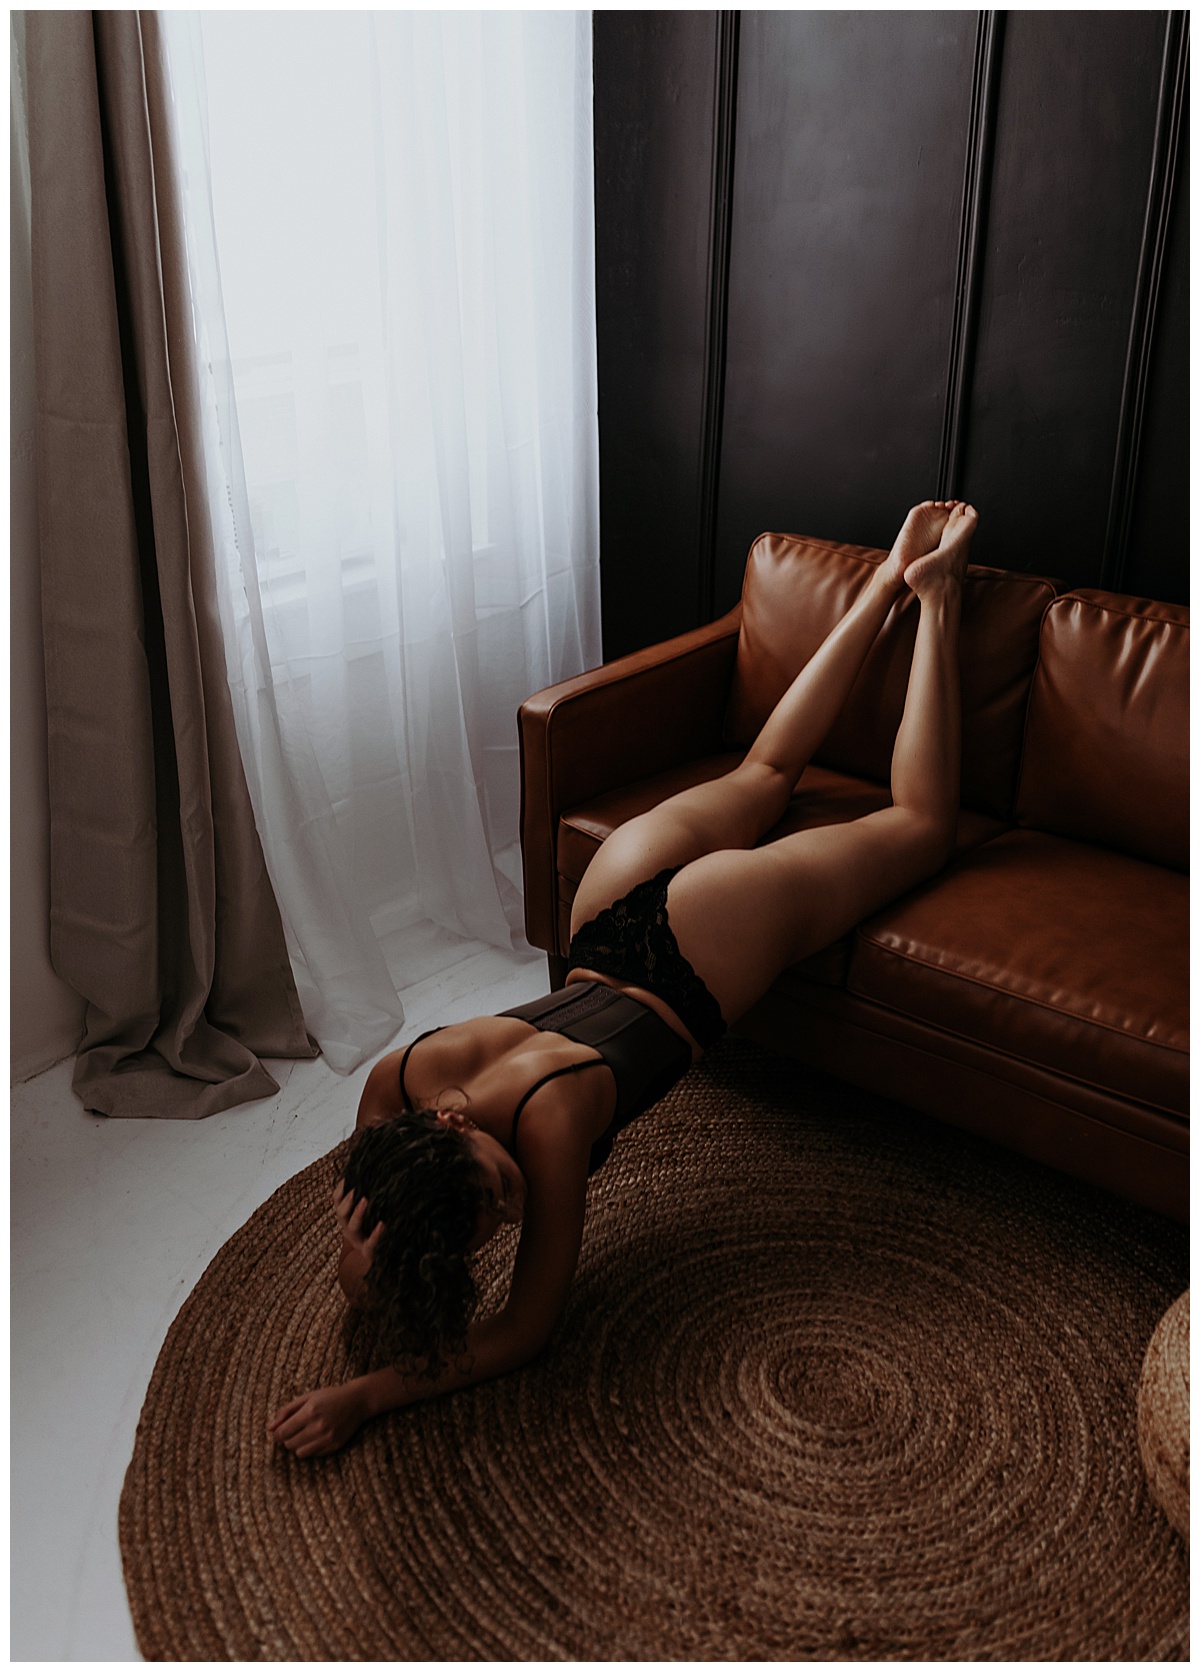 Adult in black lingerie leaning over couch for Mary Castillo Photography